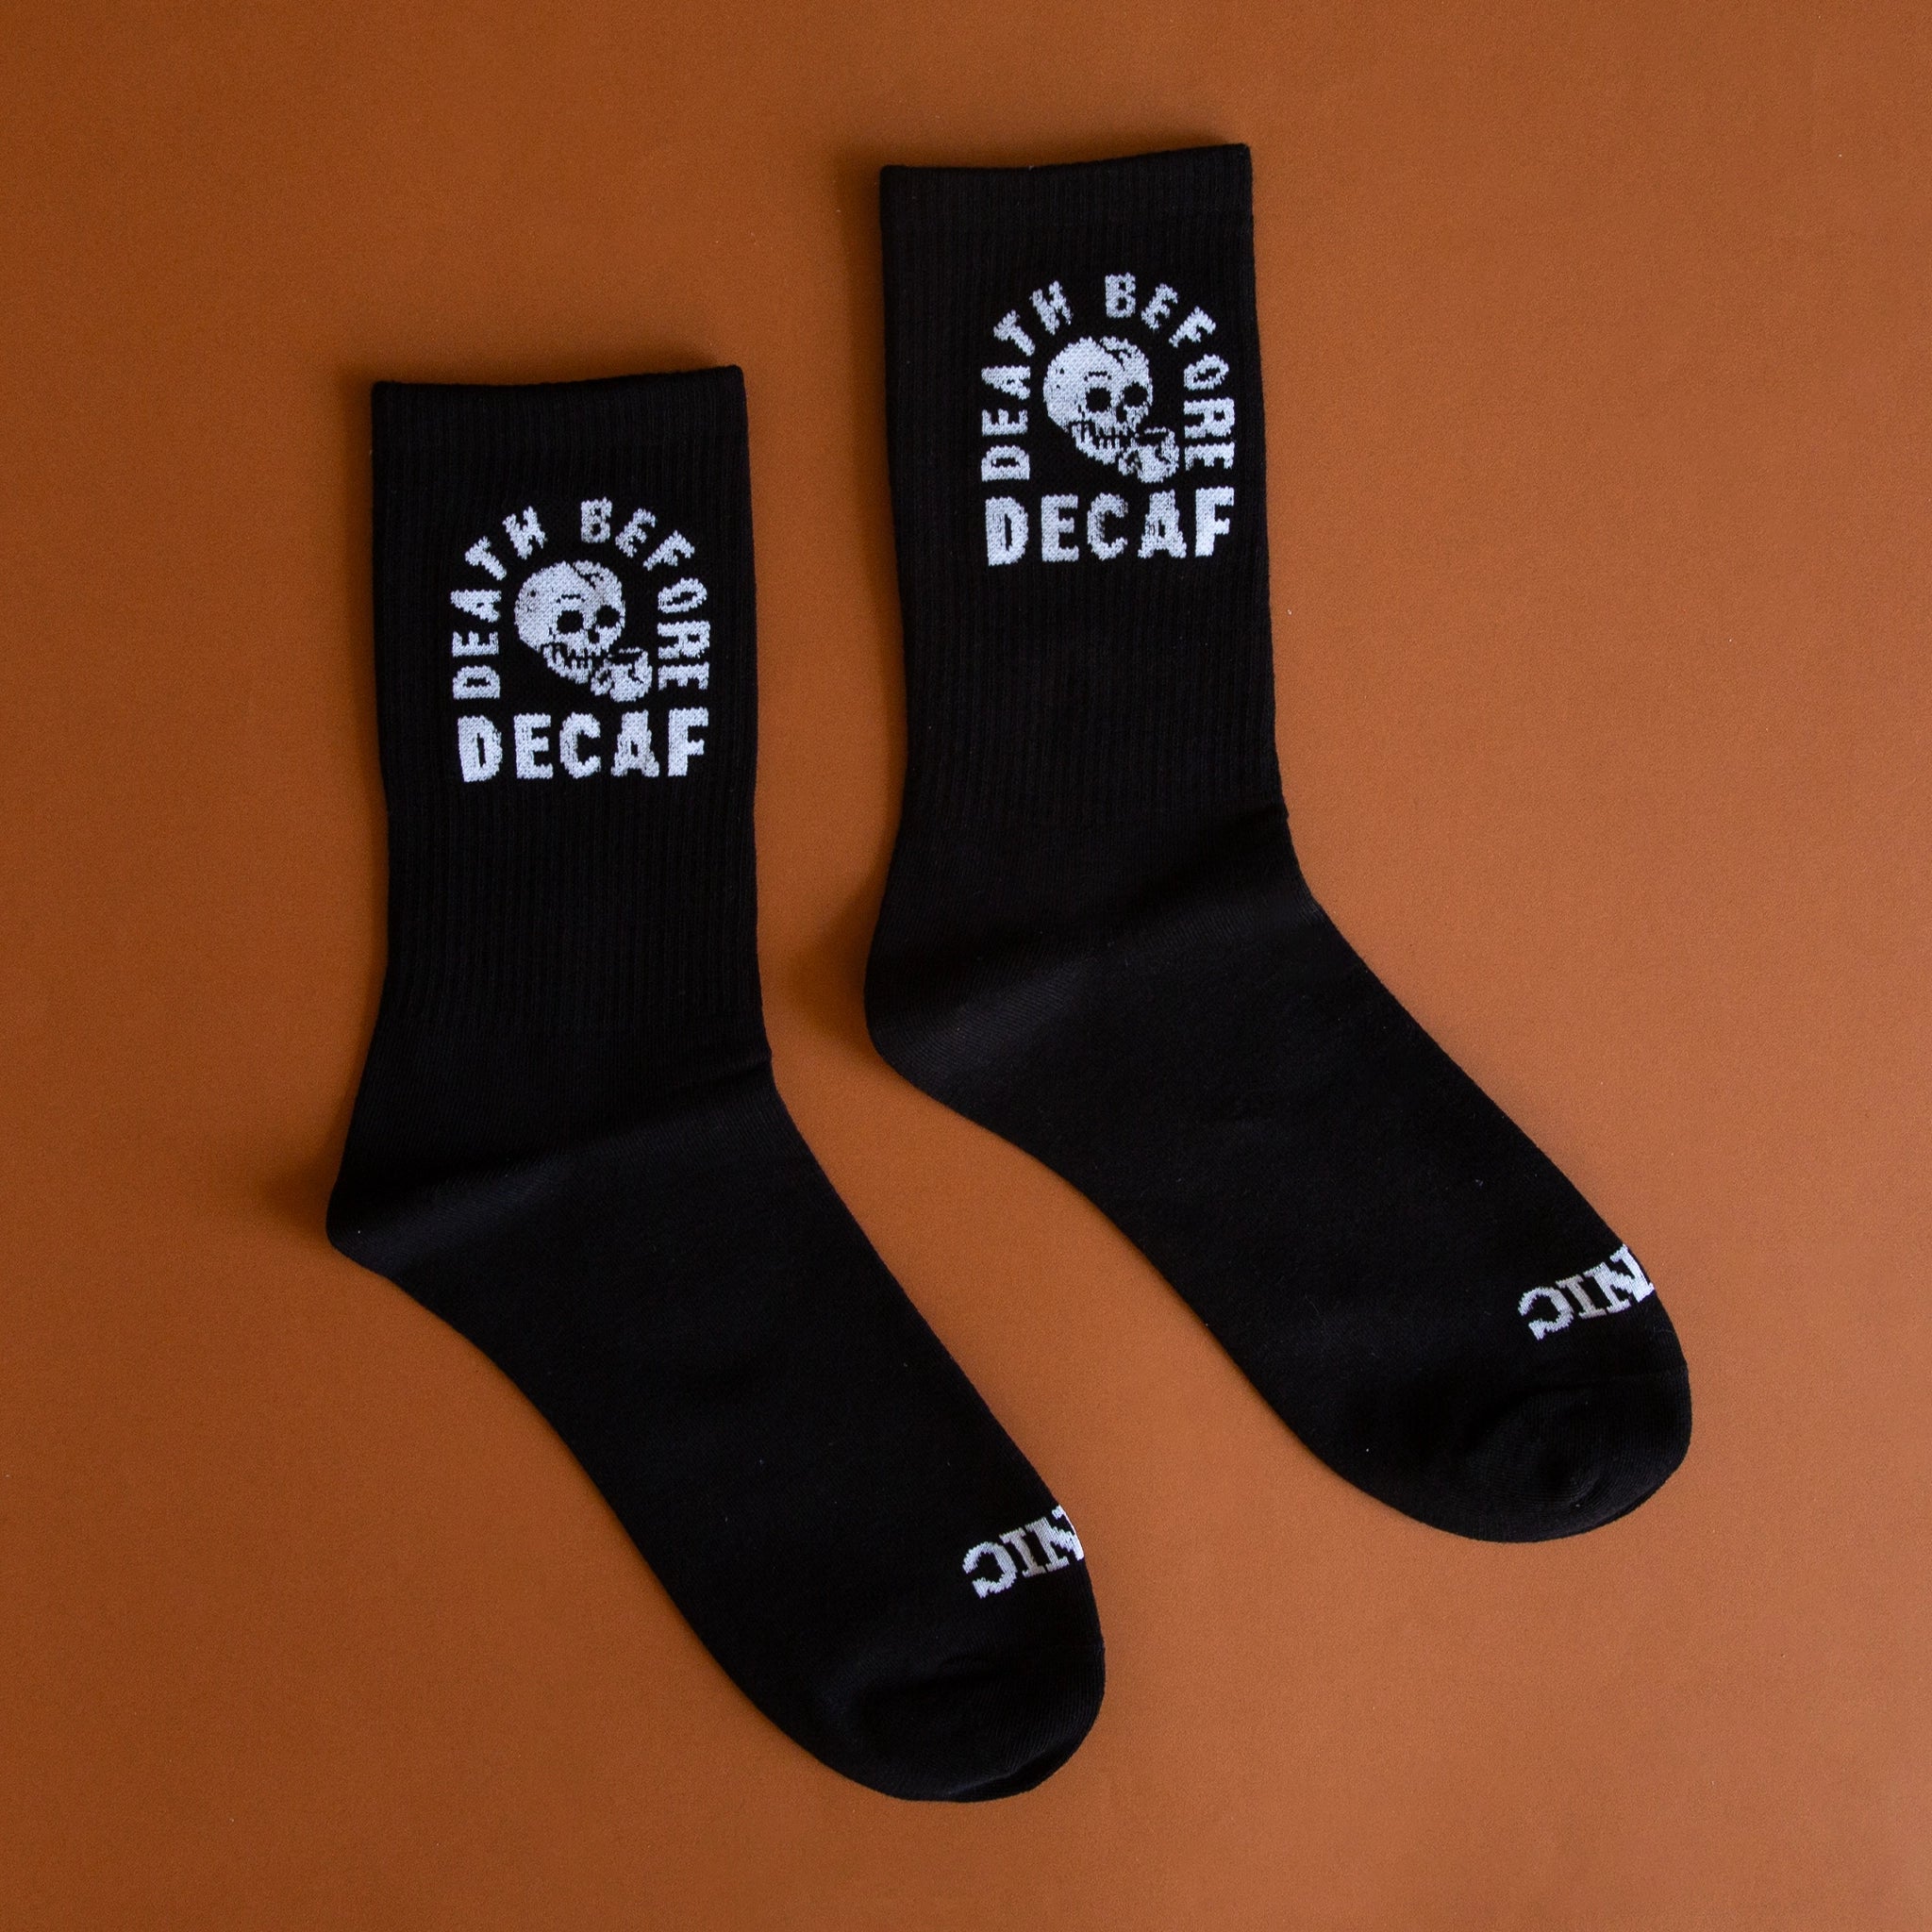 Black crew socks with a skull graphic on the ankle area and has white text wrapped around it that says, "Death Before Decaf".